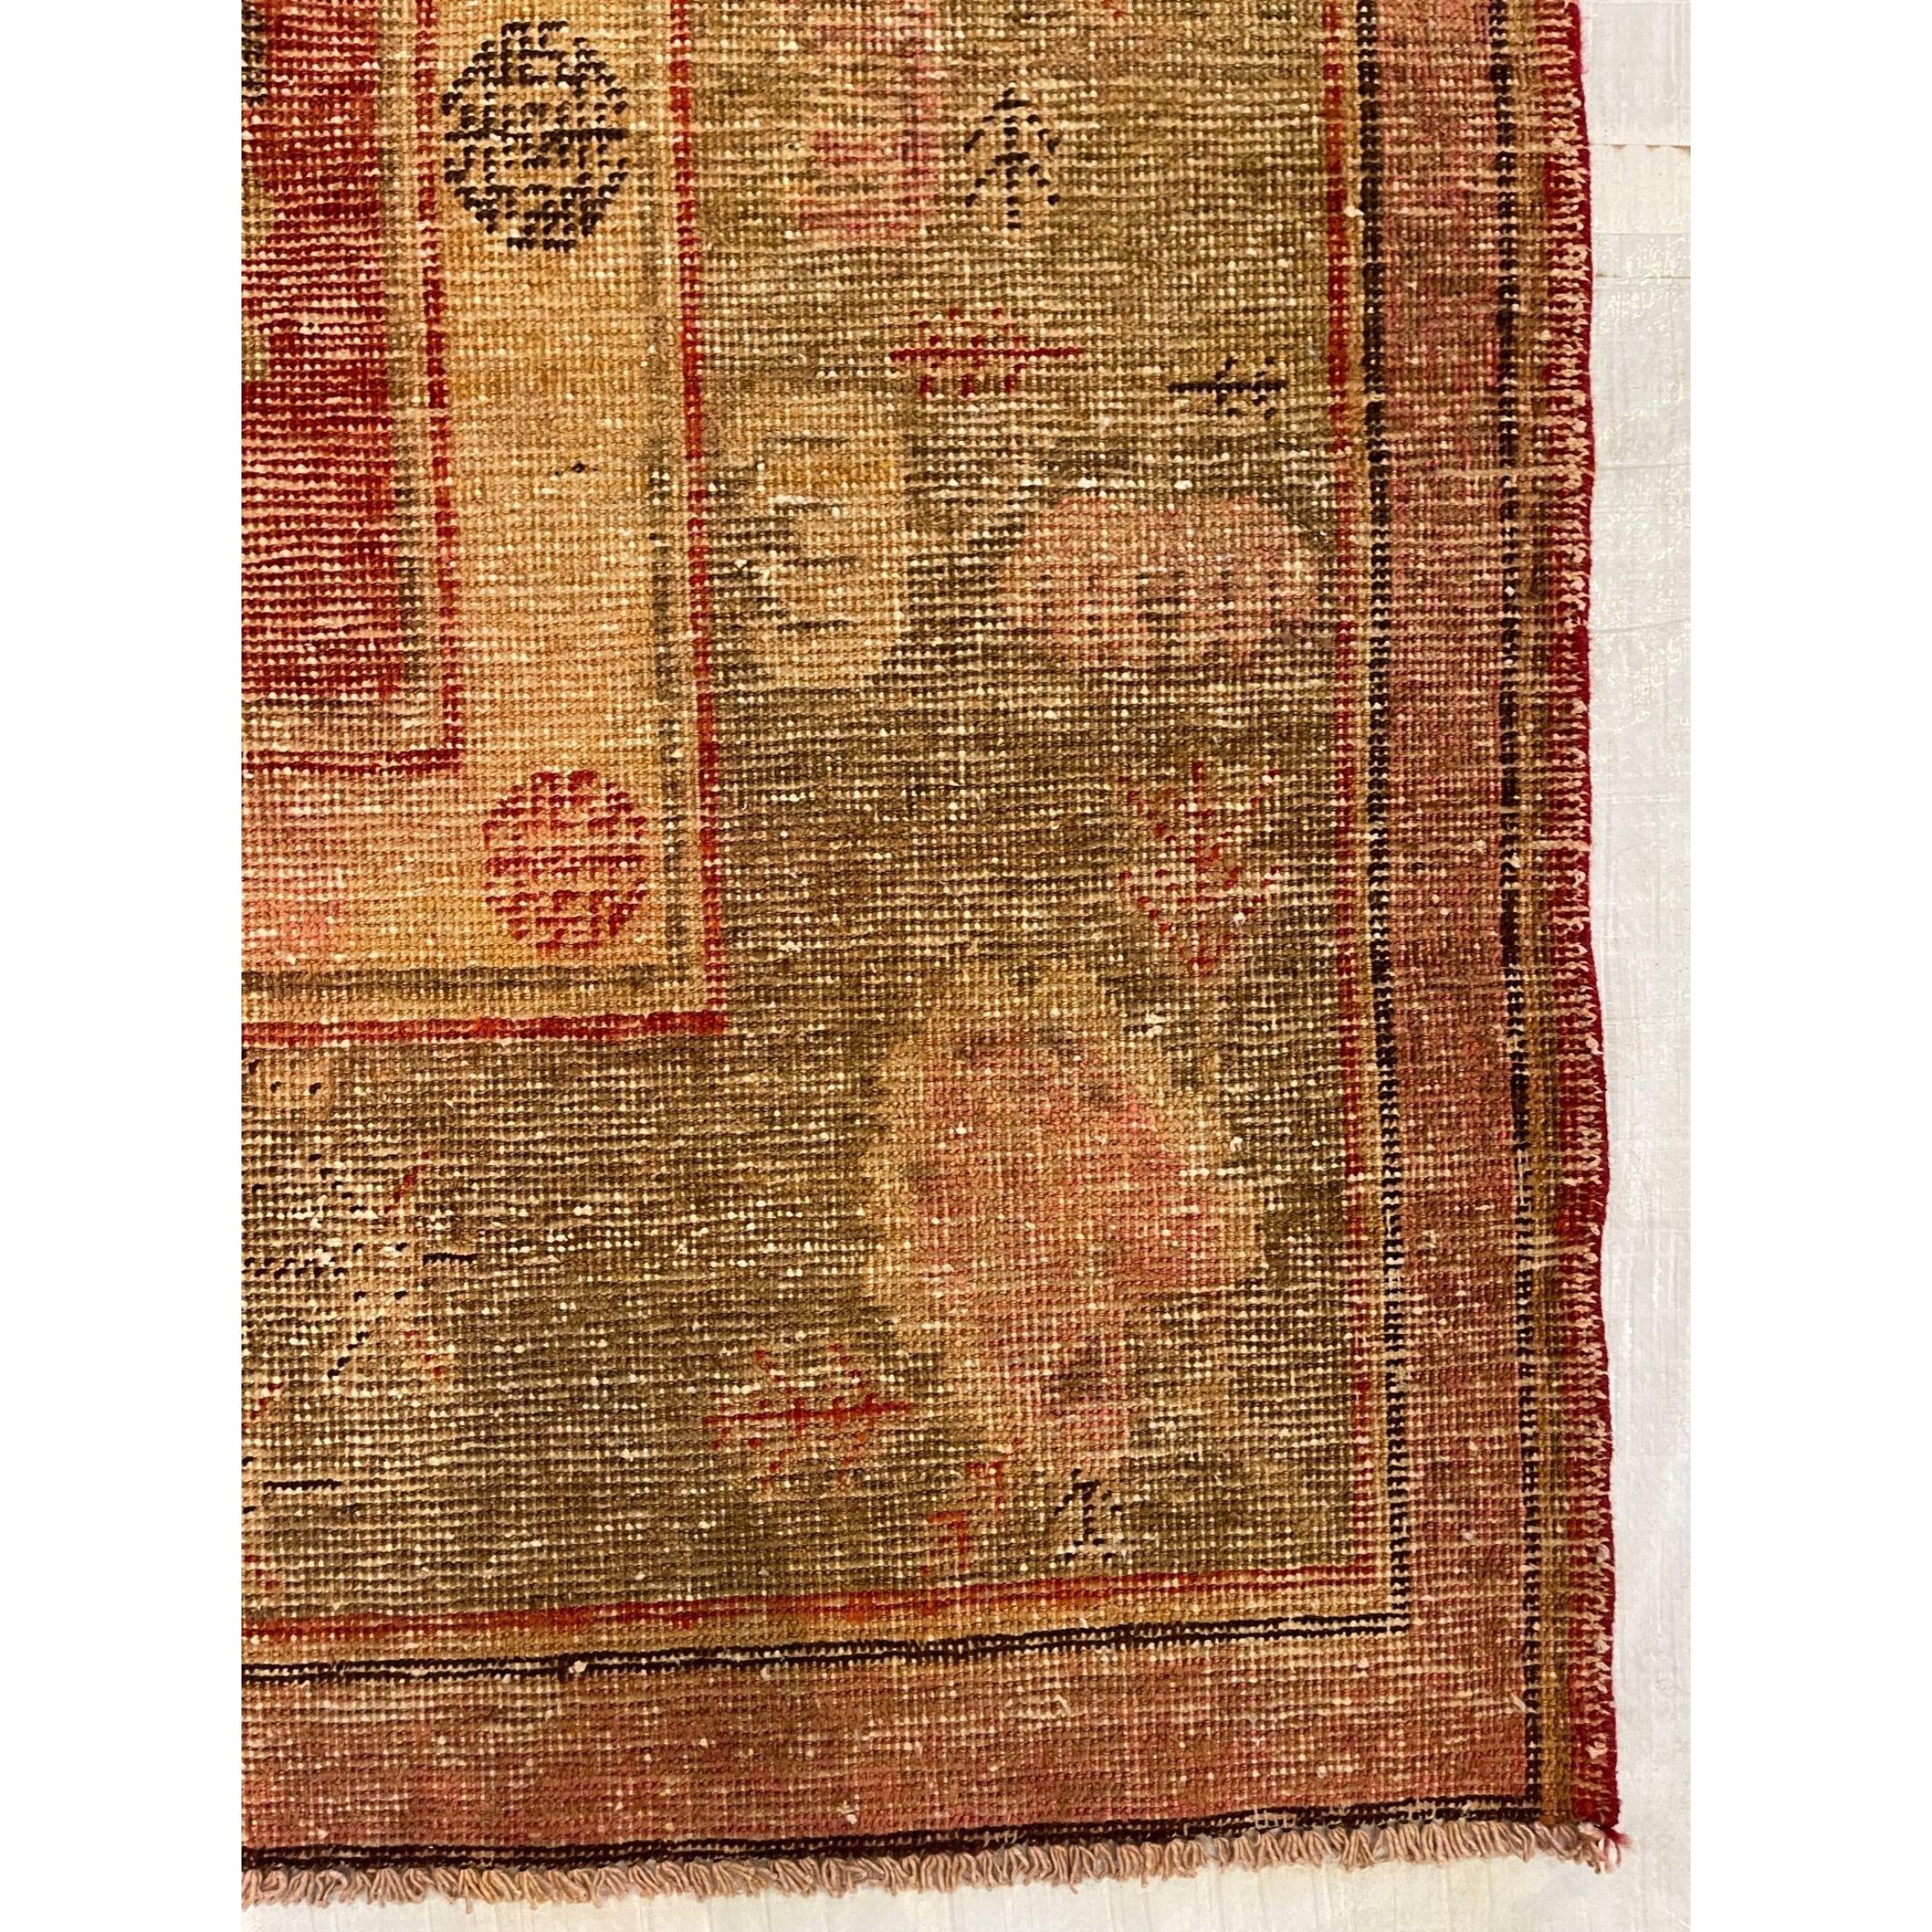 Antique Nomad Samarkand Rug In Good Condition For Sale In Los Angeles, US